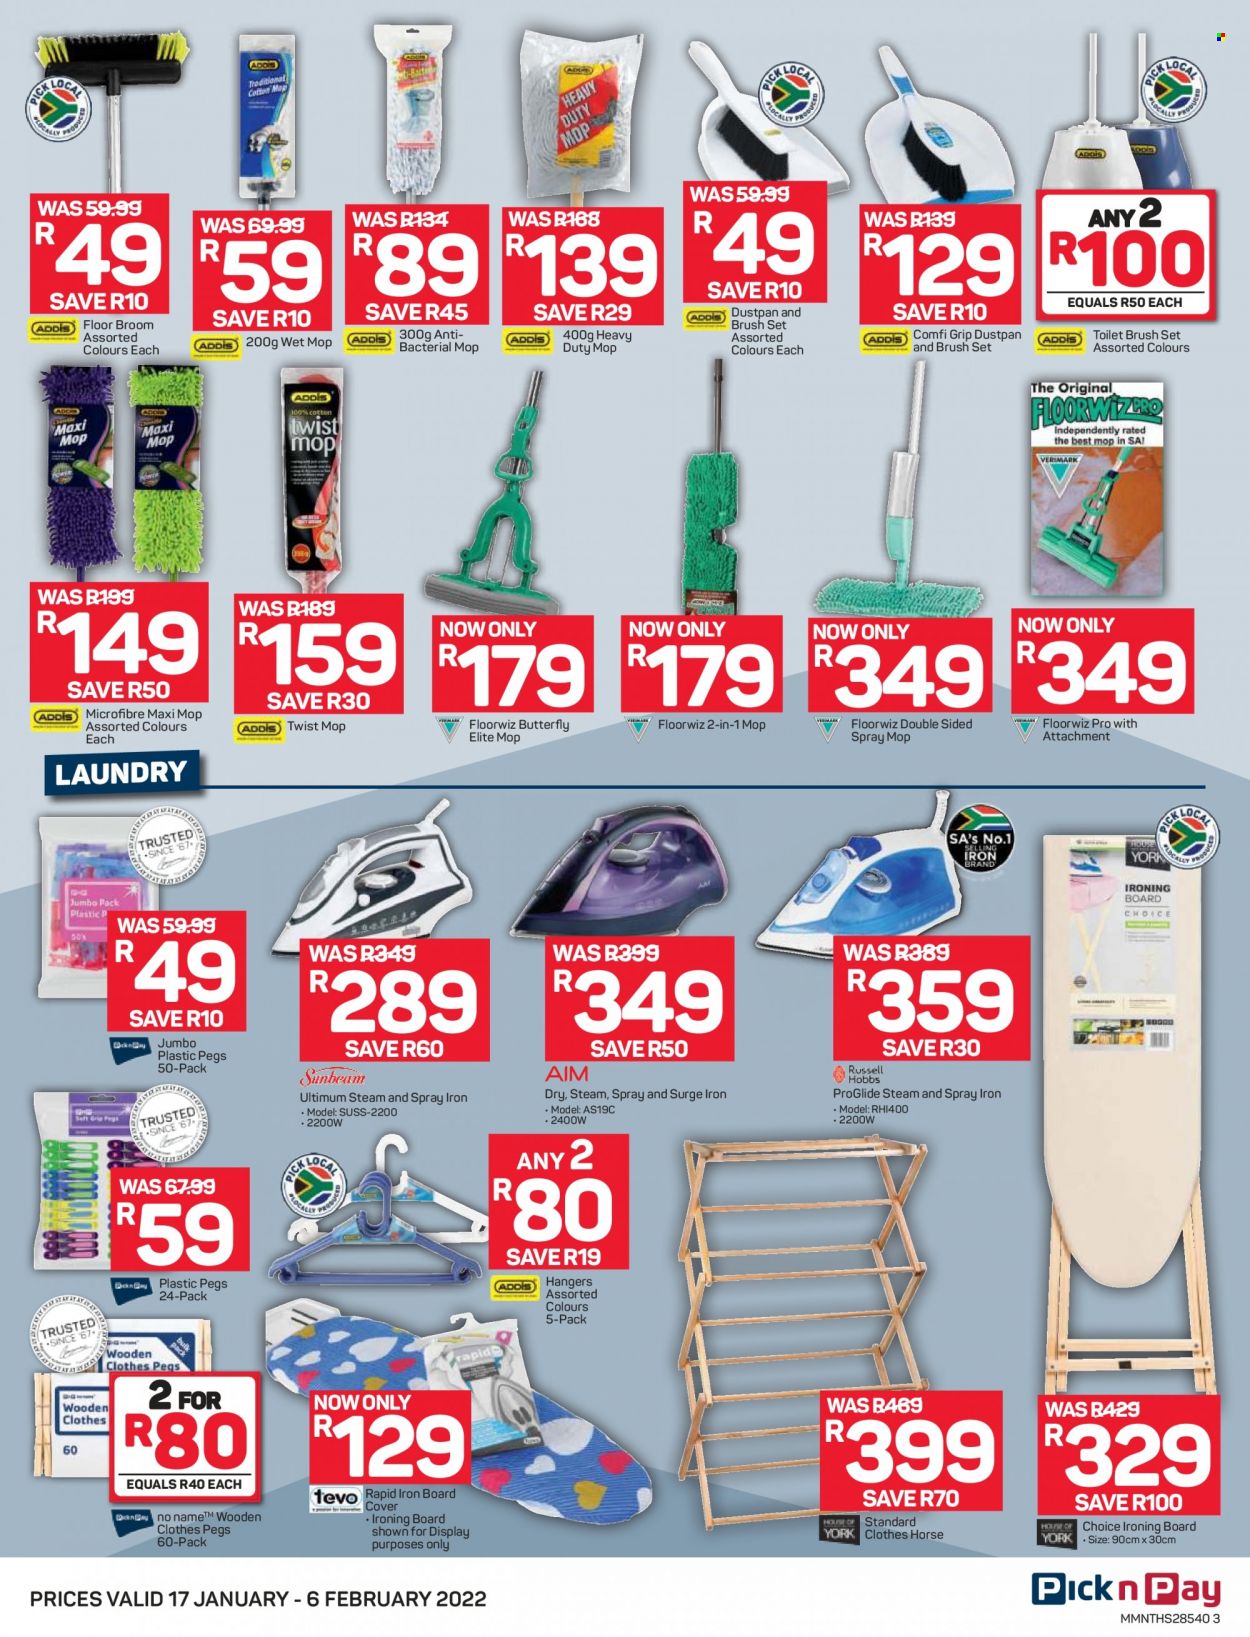 Pick n Pay specials - 01.17.2022 - 02.06.2022. 